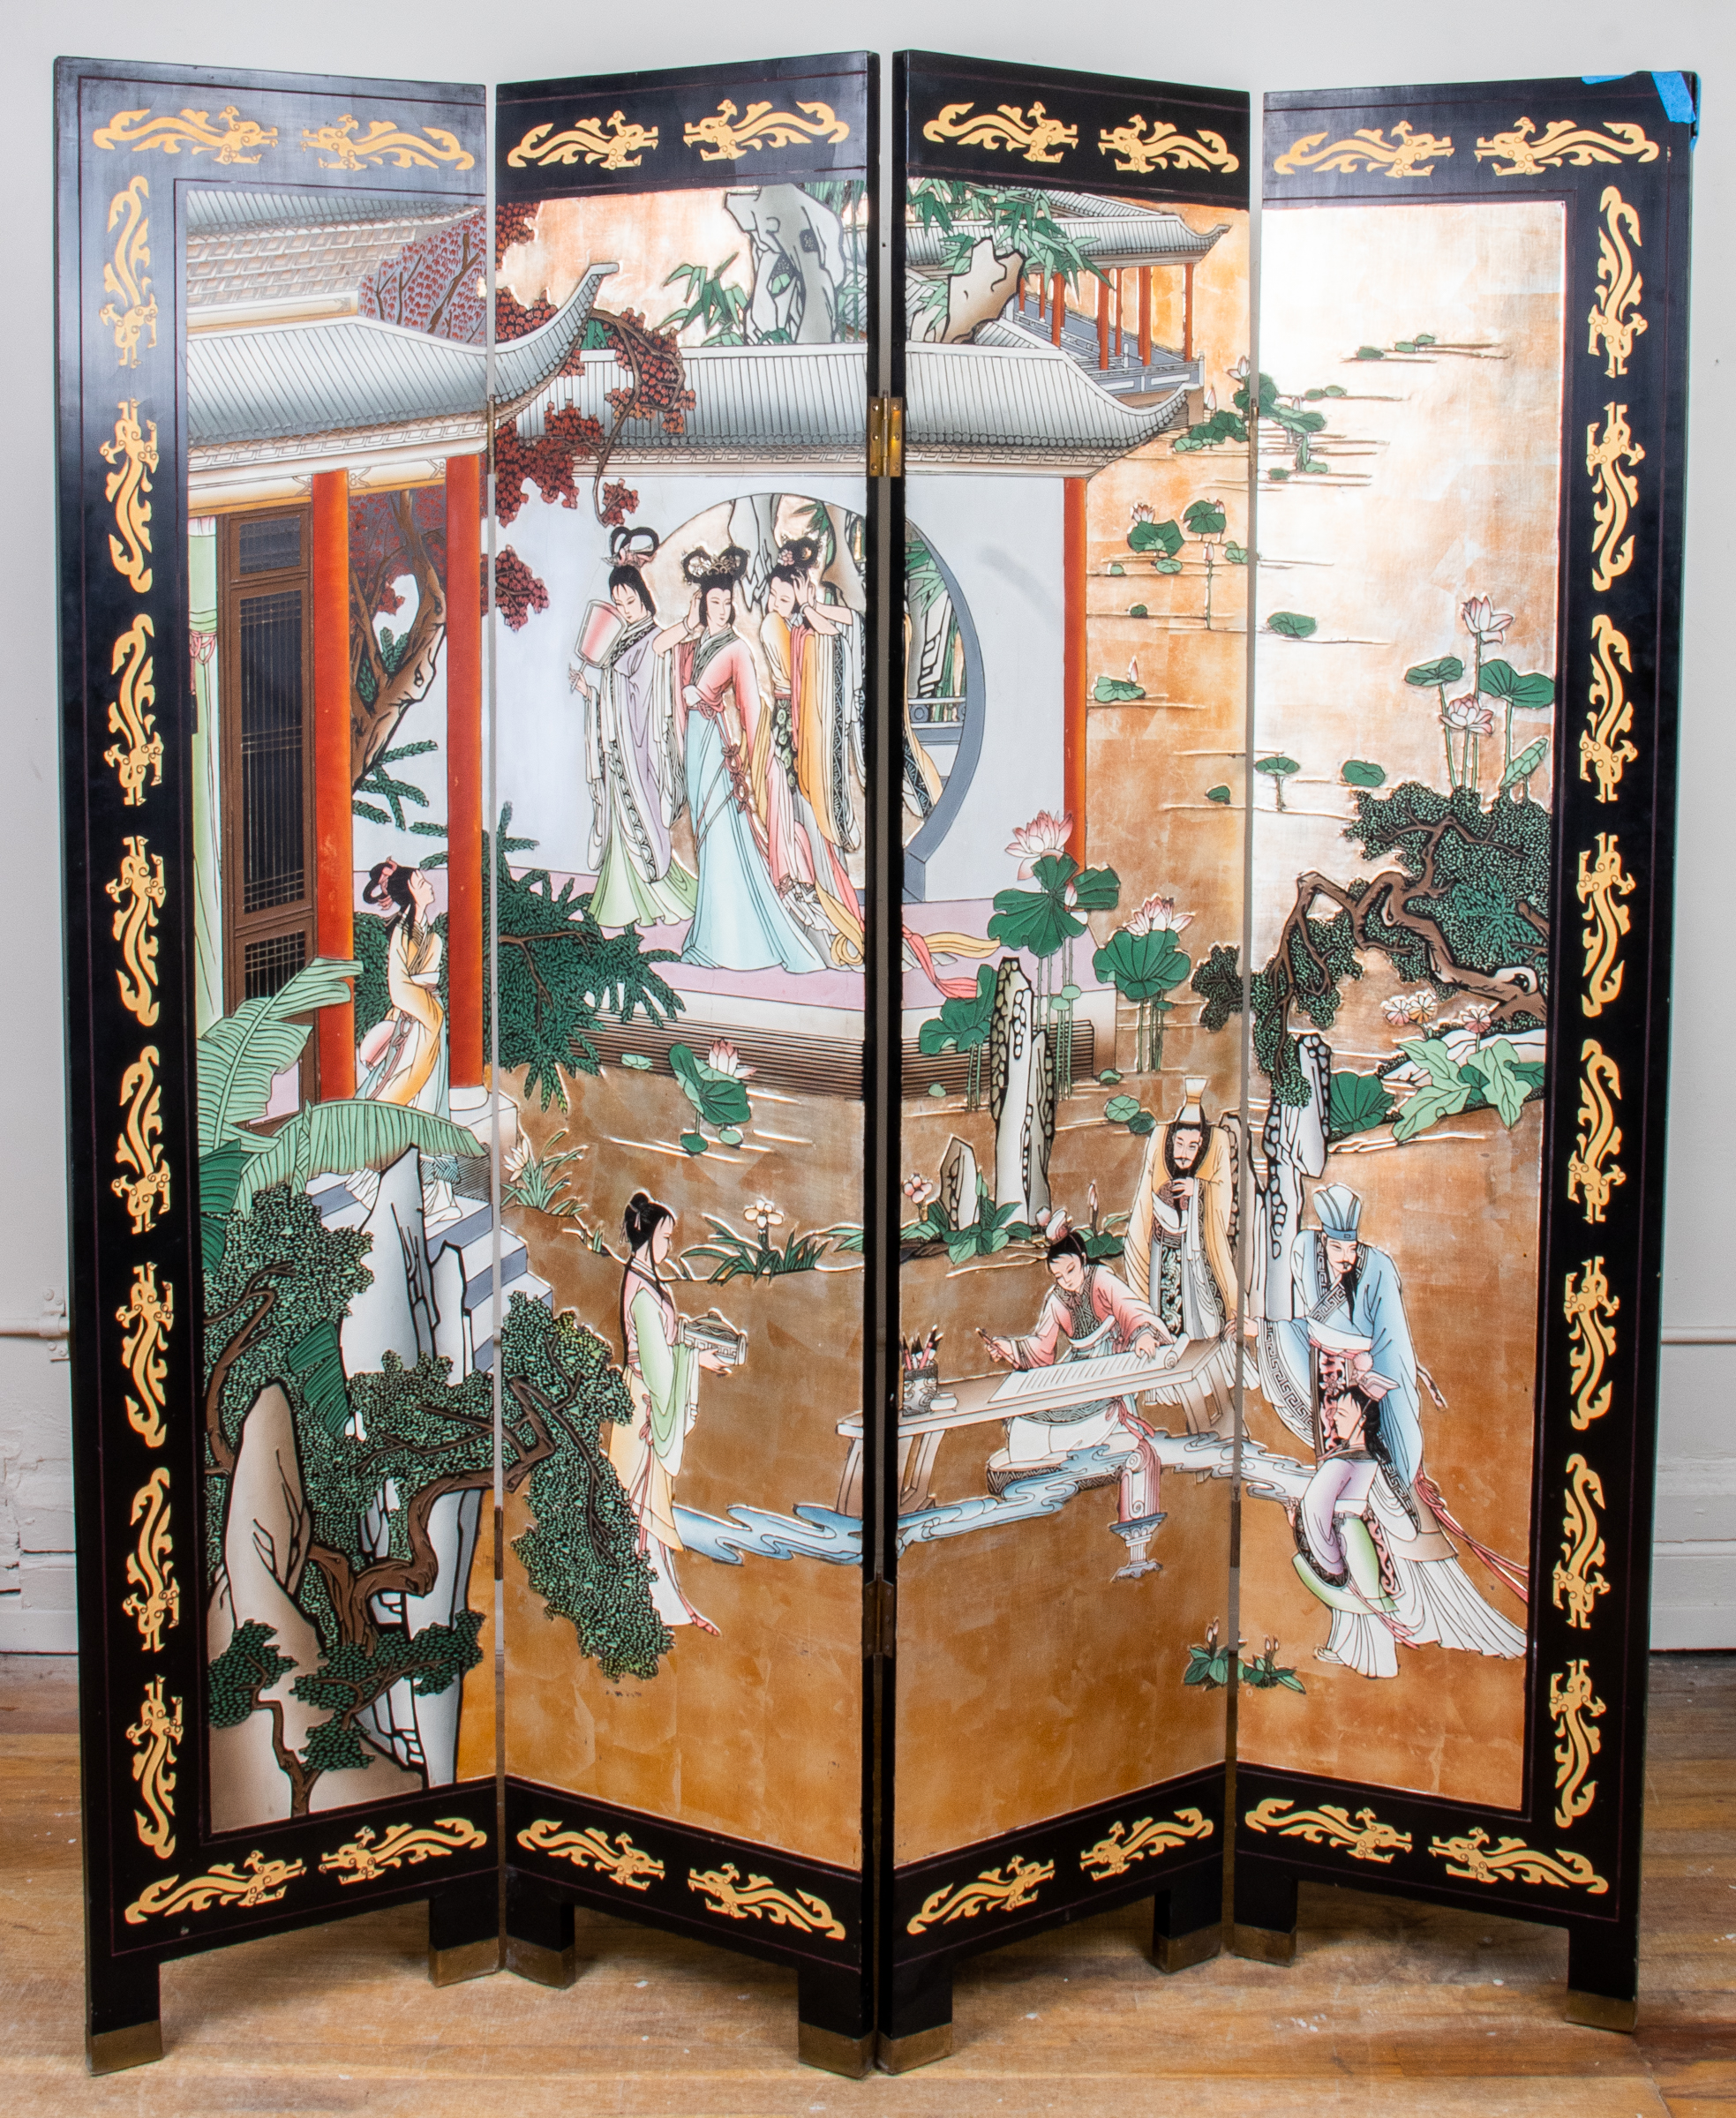 ASIAN POLYCHROME LACQUER FOUR PANEL